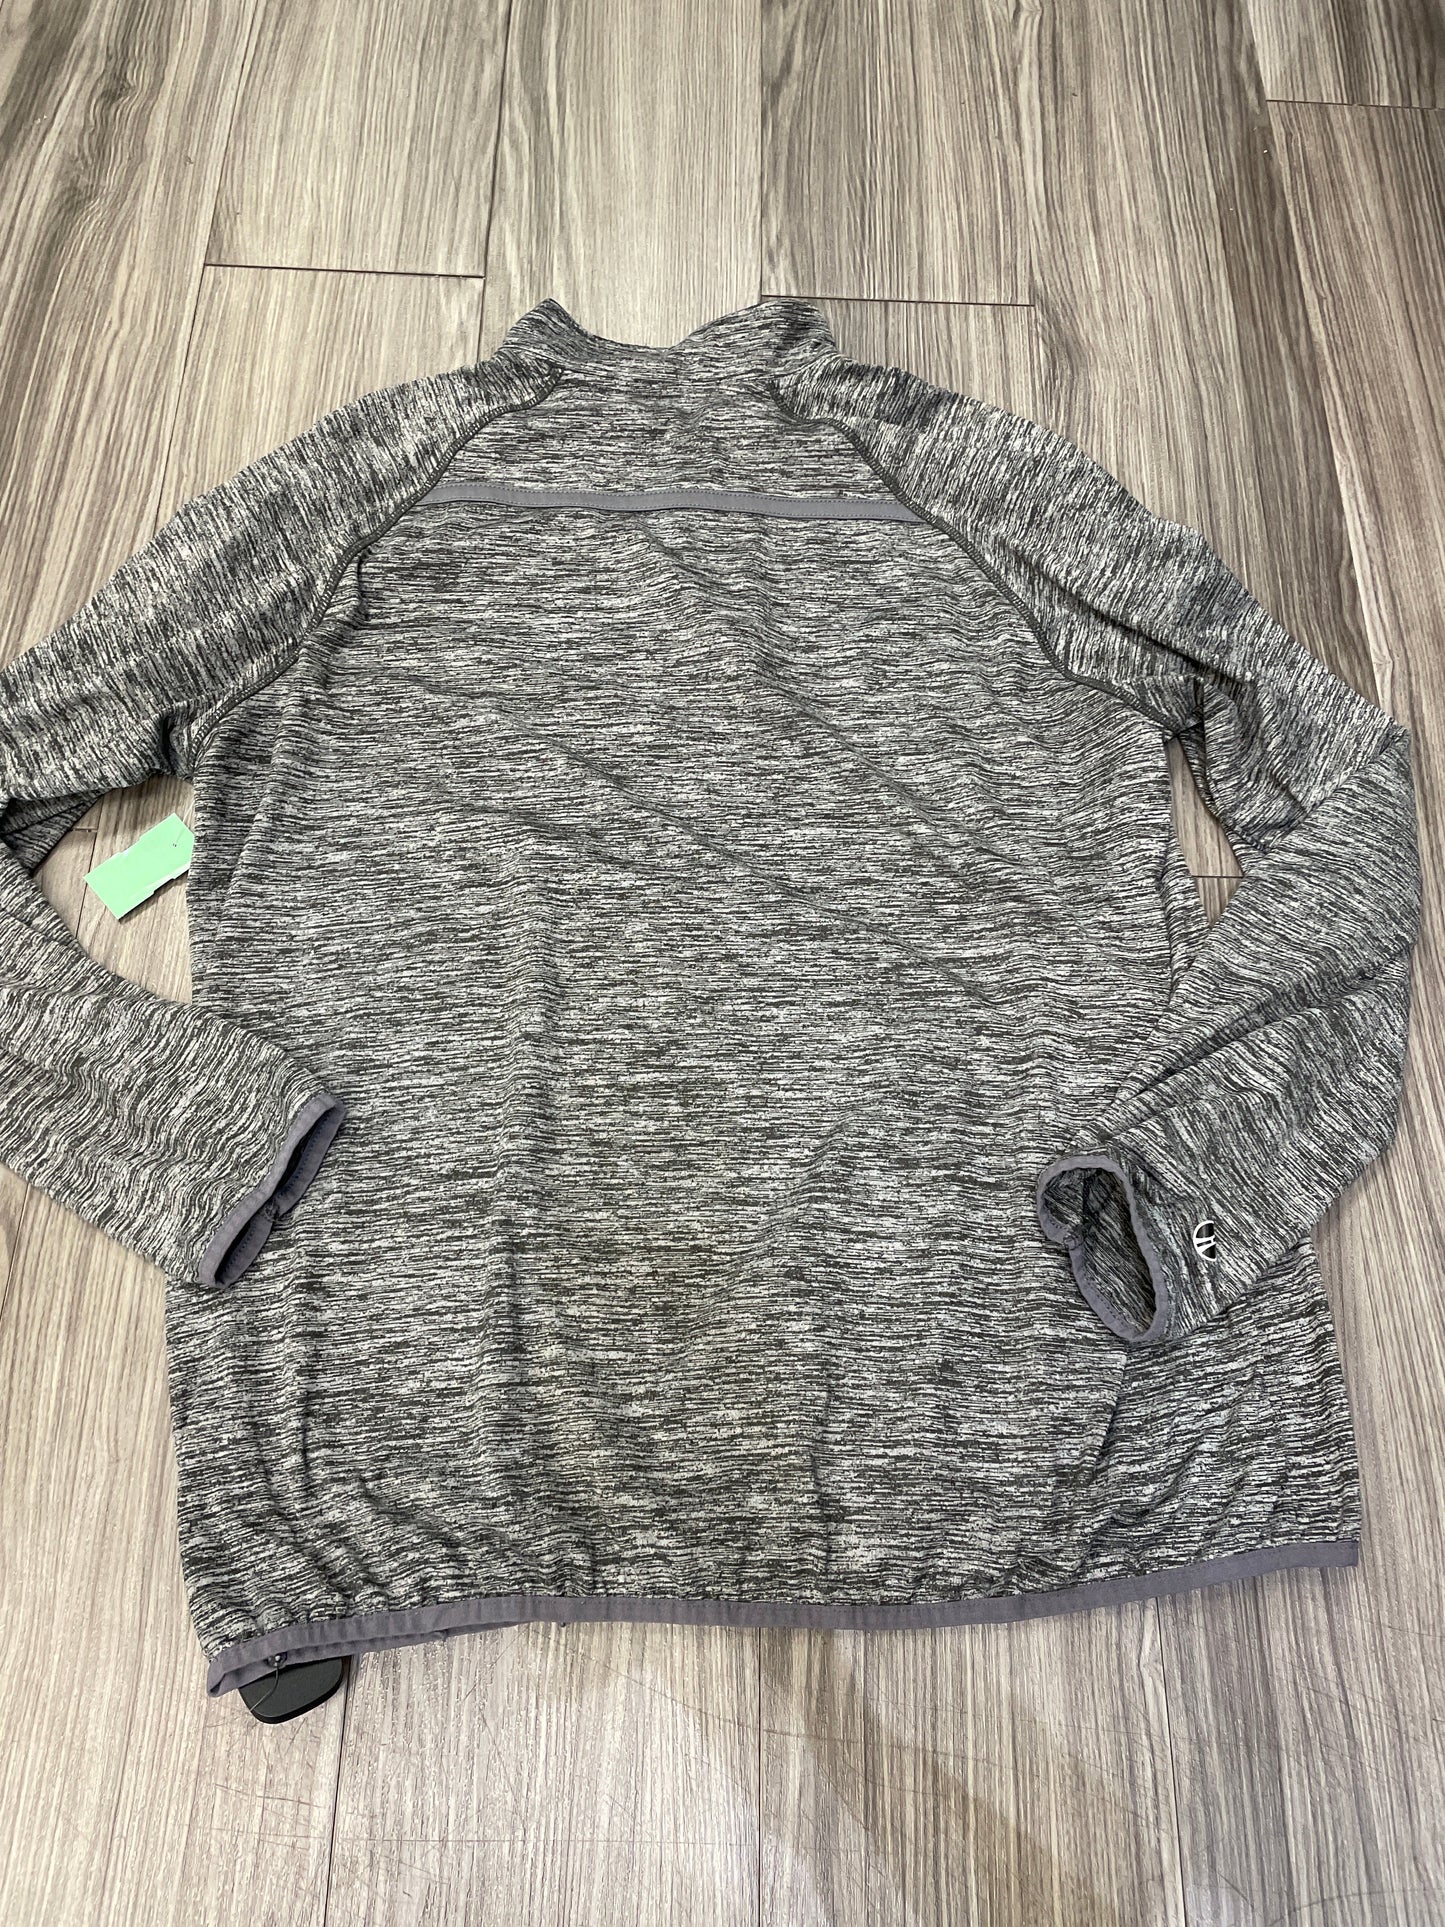 Grey Athletic Top Long Sleeve Collar Nike, Size 2x